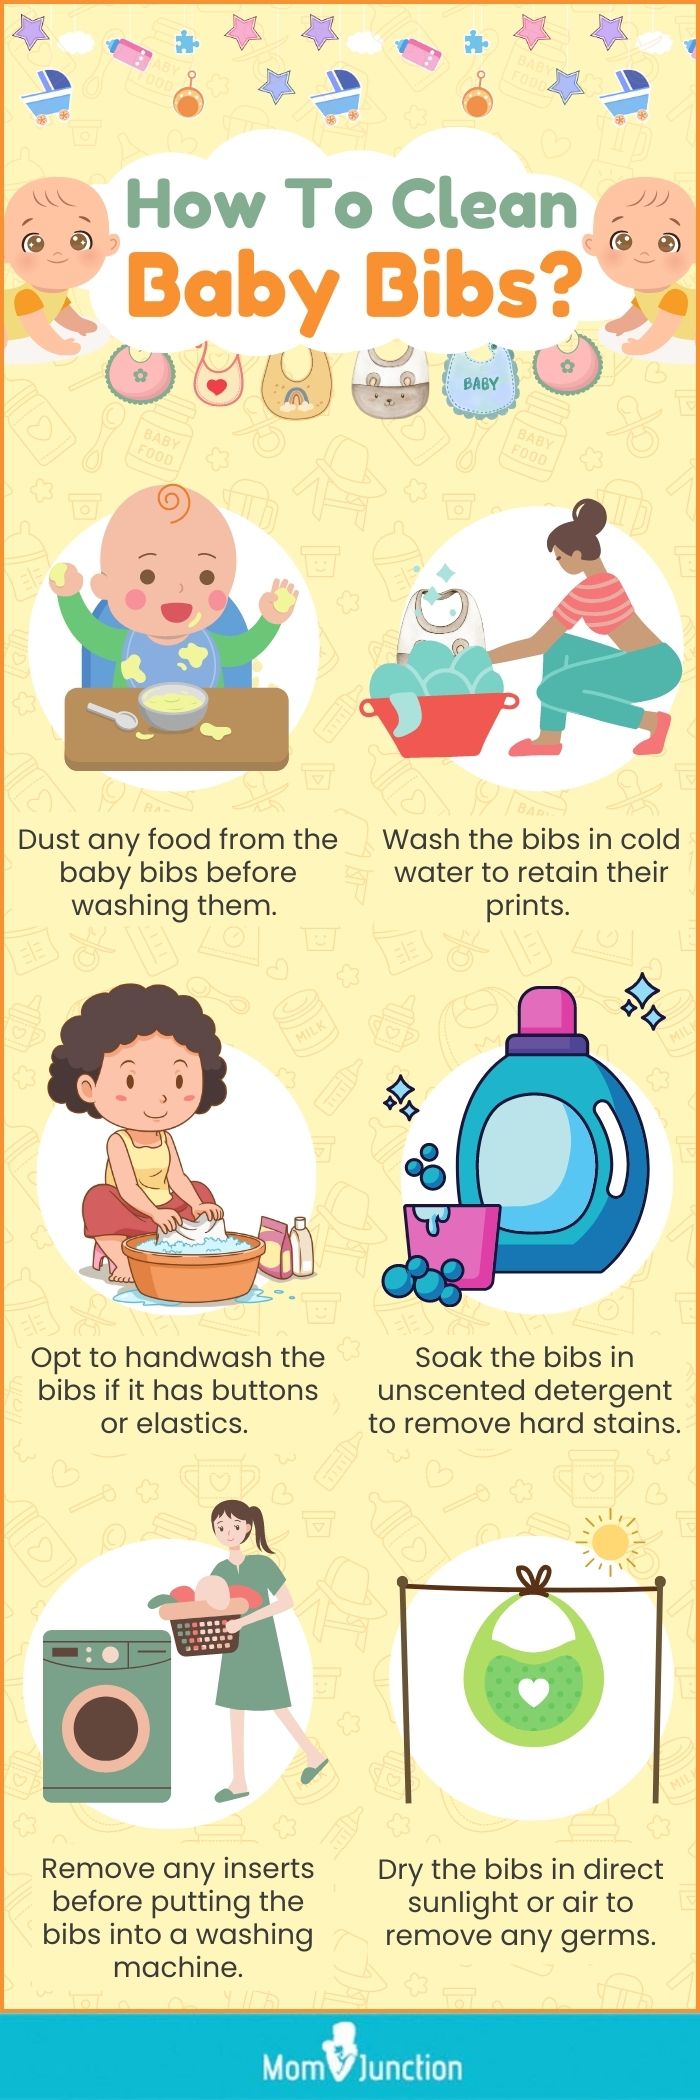 How To Clean Baby Bibs